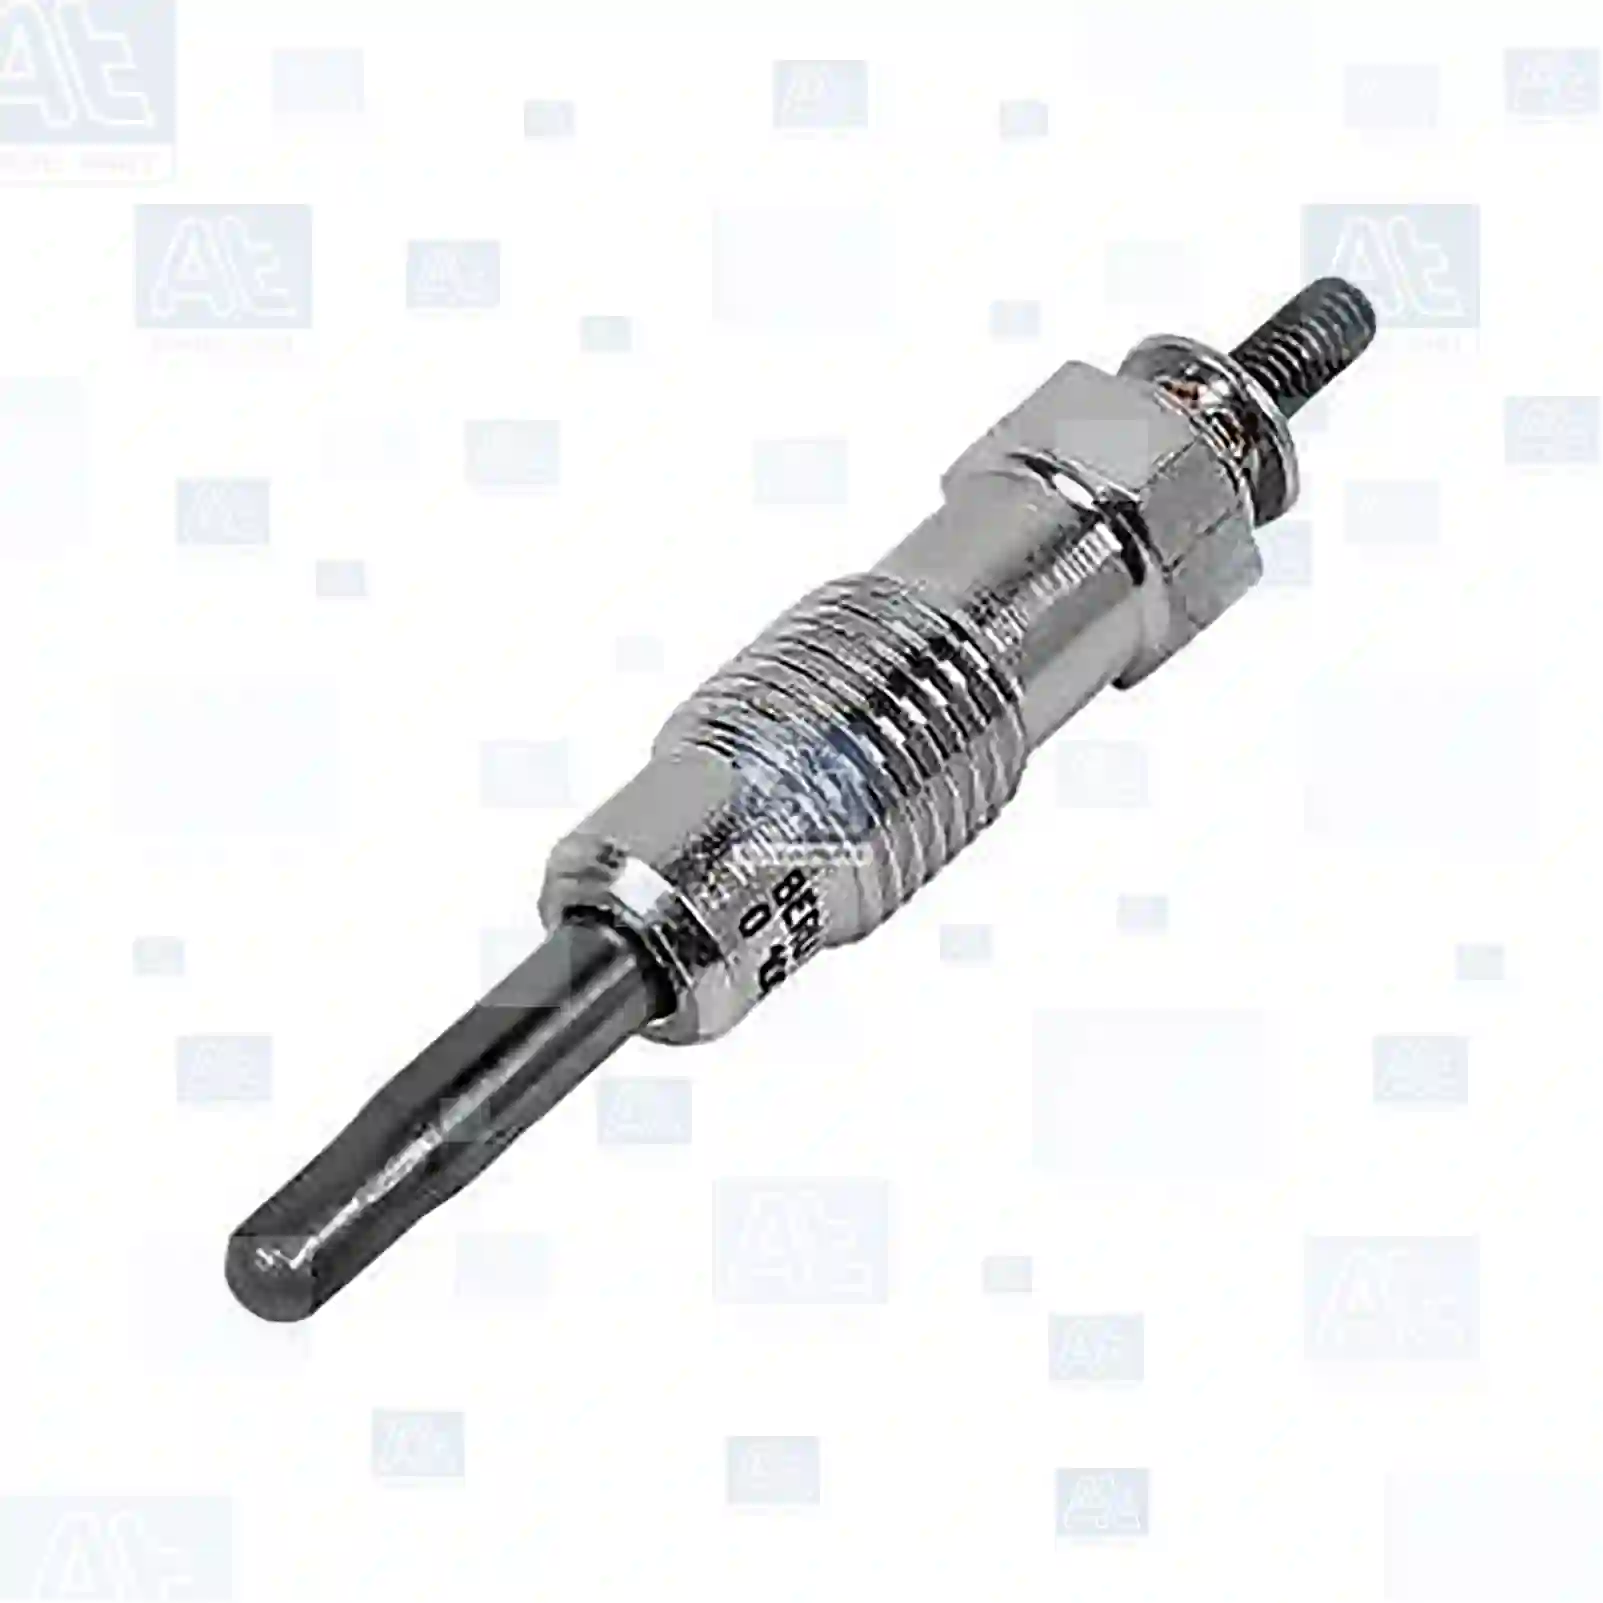 Glow plug, at no 77700616, oem no: 596033, 59621F, 59621W, 5962T7, 9004100280, 9153891099, 9600978380, 9607038880, 8671004849, LBU9954, 07777837, 46447610, 50032391, 71735459, 71735460, 7777837, 98459883, 98462491, 98462492, 98498630, 1649459, 6075812, 6137454, B27SR, B28SR, B42SR, 4403145, 88900732, 88900735, 88900737, 9111145, 98459883, 98462492, 98498630, 00484906, 46447610, 71735459, 98459883, 98462491, 98462492, 4403145, 596033, 59621F, 59621W, 5962T7, 9004100280, 9153891099, 9600978380, 9607038880, 7701040208, 7701414081, 7701414083, 8671004849, NCC10002 At Spare Part | Engine, Accelerator Pedal, Camshaft, Connecting Rod, Crankcase, Crankshaft, Cylinder Head, Engine Suspension Mountings, Exhaust Manifold, Exhaust Gas Recirculation, Filter Kits, Flywheel Housing, General Overhaul Kits, Engine, Intake Manifold, Oil Cleaner, Oil Cooler, Oil Filter, Oil Pump, Oil Sump, Piston & Liner, Sensor & Switch, Timing Case, Turbocharger, Cooling System, Belt Tensioner, Coolant Filter, Coolant Pipe, Corrosion Prevention Agent, Drive, Expansion Tank, Fan, Intercooler, Monitors & Gauges, Radiator, Thermostat, V-Belt / Timing belt, Water Pump, Fuel System, Electronical Injector Unit, Feed Pump, Fuel Filter, cpl., Fuel Gauge Sender,  Fuel Line, Fuel Pump, Fuel Tank, Injection Line Kit, Injection Pump, Exhaust System, Clutch & Pedal, Gearbox, Propeller Shaft, Axles, Brake System, Hubs & Wheels, Suspension, Leaf Spring, Universal Parts / Accessories, Steering, Electrical System, Cabin Glow plug, at no 77700616, oem no: 596033, 59621F, 59621W, 5962T7, 9004100280, 9153891099, 9600978380, 9607038880, 8671004849, LBU9954, 07777837, 46447610, 50032391, 71735459, 71735460, 7777837, 98459883, 98462491, 98462492, 98498630, 1649459, 6075812, 6137454, B27SR, B28SR, B42SR, 4403145, 88900732, 88900735, 88900737, 9111145, 98459883, 98462492, 98498630, 00484906, 46447610, 71735459, 98459883, 98462491, 98462492, 4403145, 596033, 59621F, 59621W, 5962T7, 9004100280, 9153891099, 9600978380, 9607038880, 7701040208, 7701414081, 7701414083, 8671004849, NCC10002 At Spare Part | Engine, Accelerator Pedal, Camshaft, Connecting Rod, Crankcase, Crankshaft, Cylinder Head, Engine Suspension Mountings, Exhaust Manifold, Exhaust Gas Recirculation, Filter Kits, Flywheel Housing, General Overhaul Kits, Engine, Intake Manifold, Oil Cleaner, Oil Cooler, Oil Filter, Oil Pump, Oil Sump, Piston & Liner, Sensor & Switch, Timing Case, Turbocharger, Cooling System, Belt Tensioner, Coolant Filter, Coolant Pipe, Corrosion Prevention Agent, Drive, Expansion Tank, Fan, Intercooler, Monitors & Gauges, Radiator, Thermostat, V-Belt / Timing belt, Water Pump, Fuel System, Electronical Injector Unit, Feed Pump, Fuel Filter, cpl., Fuel Gauge Sender,  Fuel Line, Fuel Pump, Fuel Tank, Injection Line Kit, Injection Pump, Exhaust System, Clutch & Pedal, Gearbox, Propeller Shaft, Axles, Brake System, Hubs & Wheels, Suspension, Leaf Spring, Universal Parts / Accessories, Steering, Electrical System, Cabin